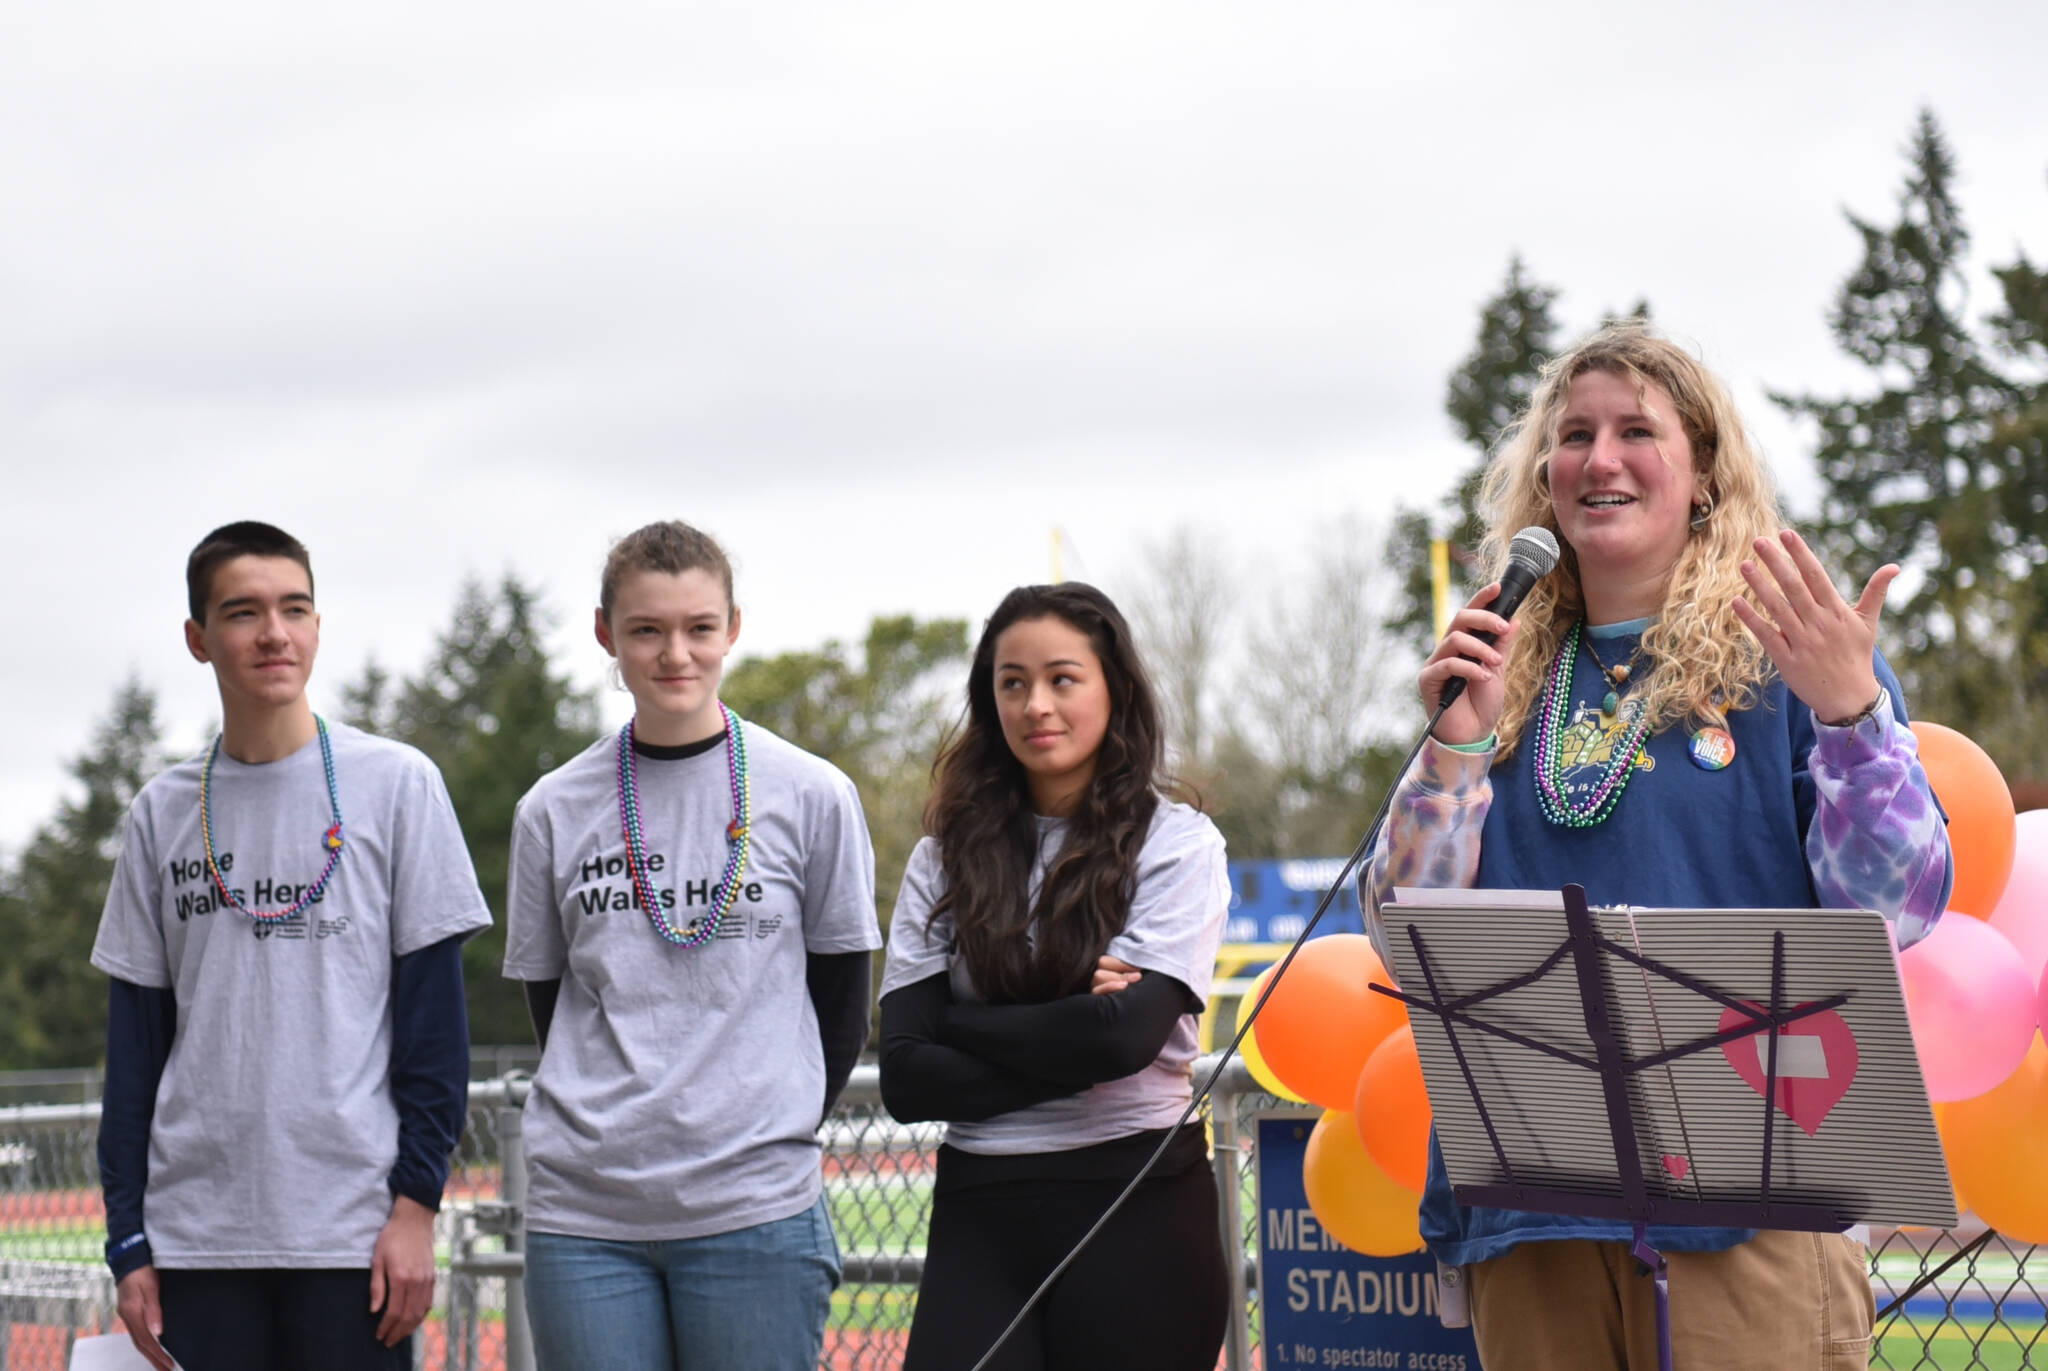 Sophomores Theo Oestreich, Maia Greiwe and Mae Wysong look on as Alexandra Velisaris speaks to attendees before the walk began.